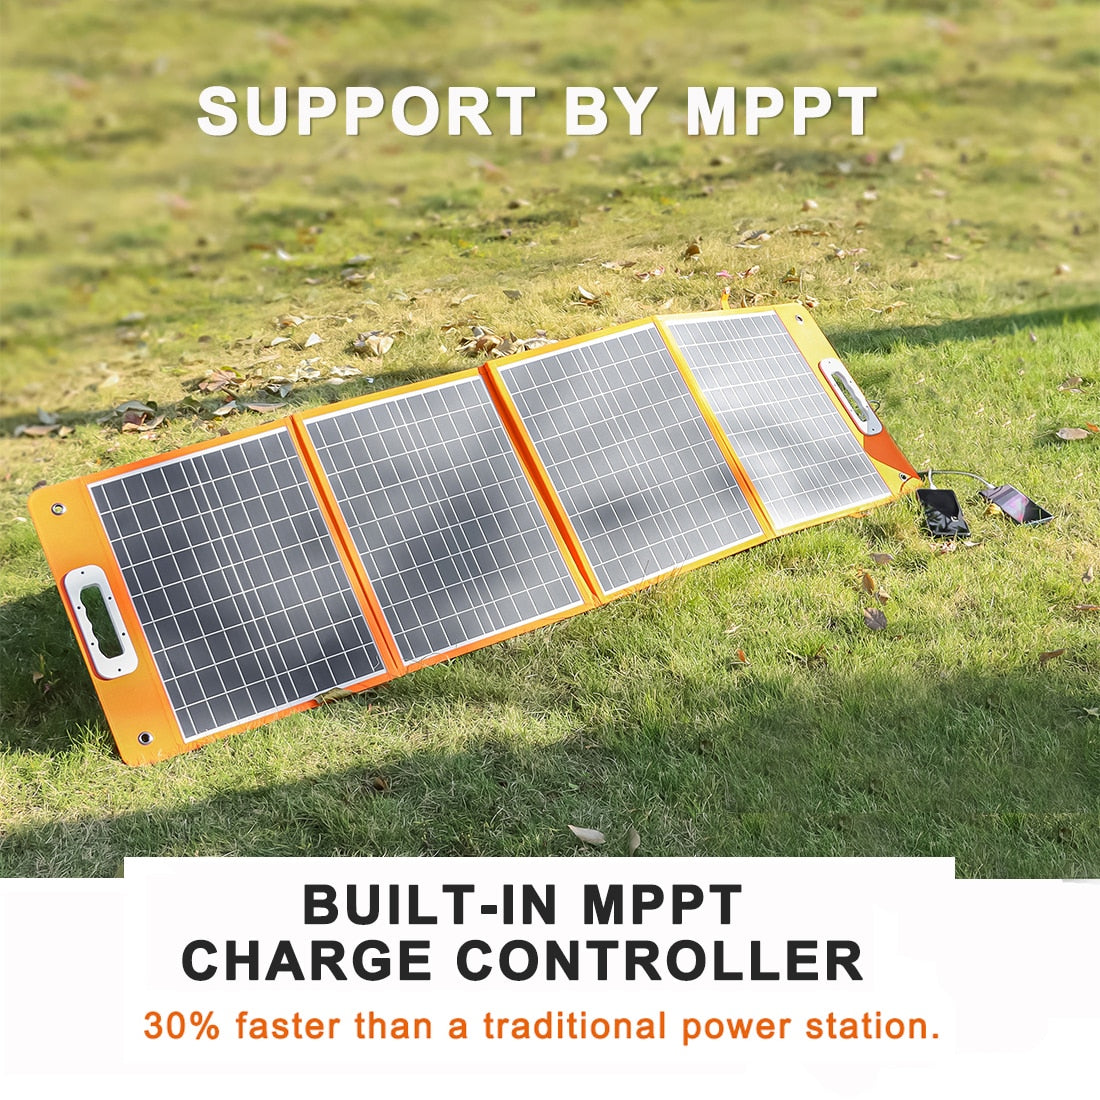 MPPT BUILT-IN MPPT CHARGE CONTRO